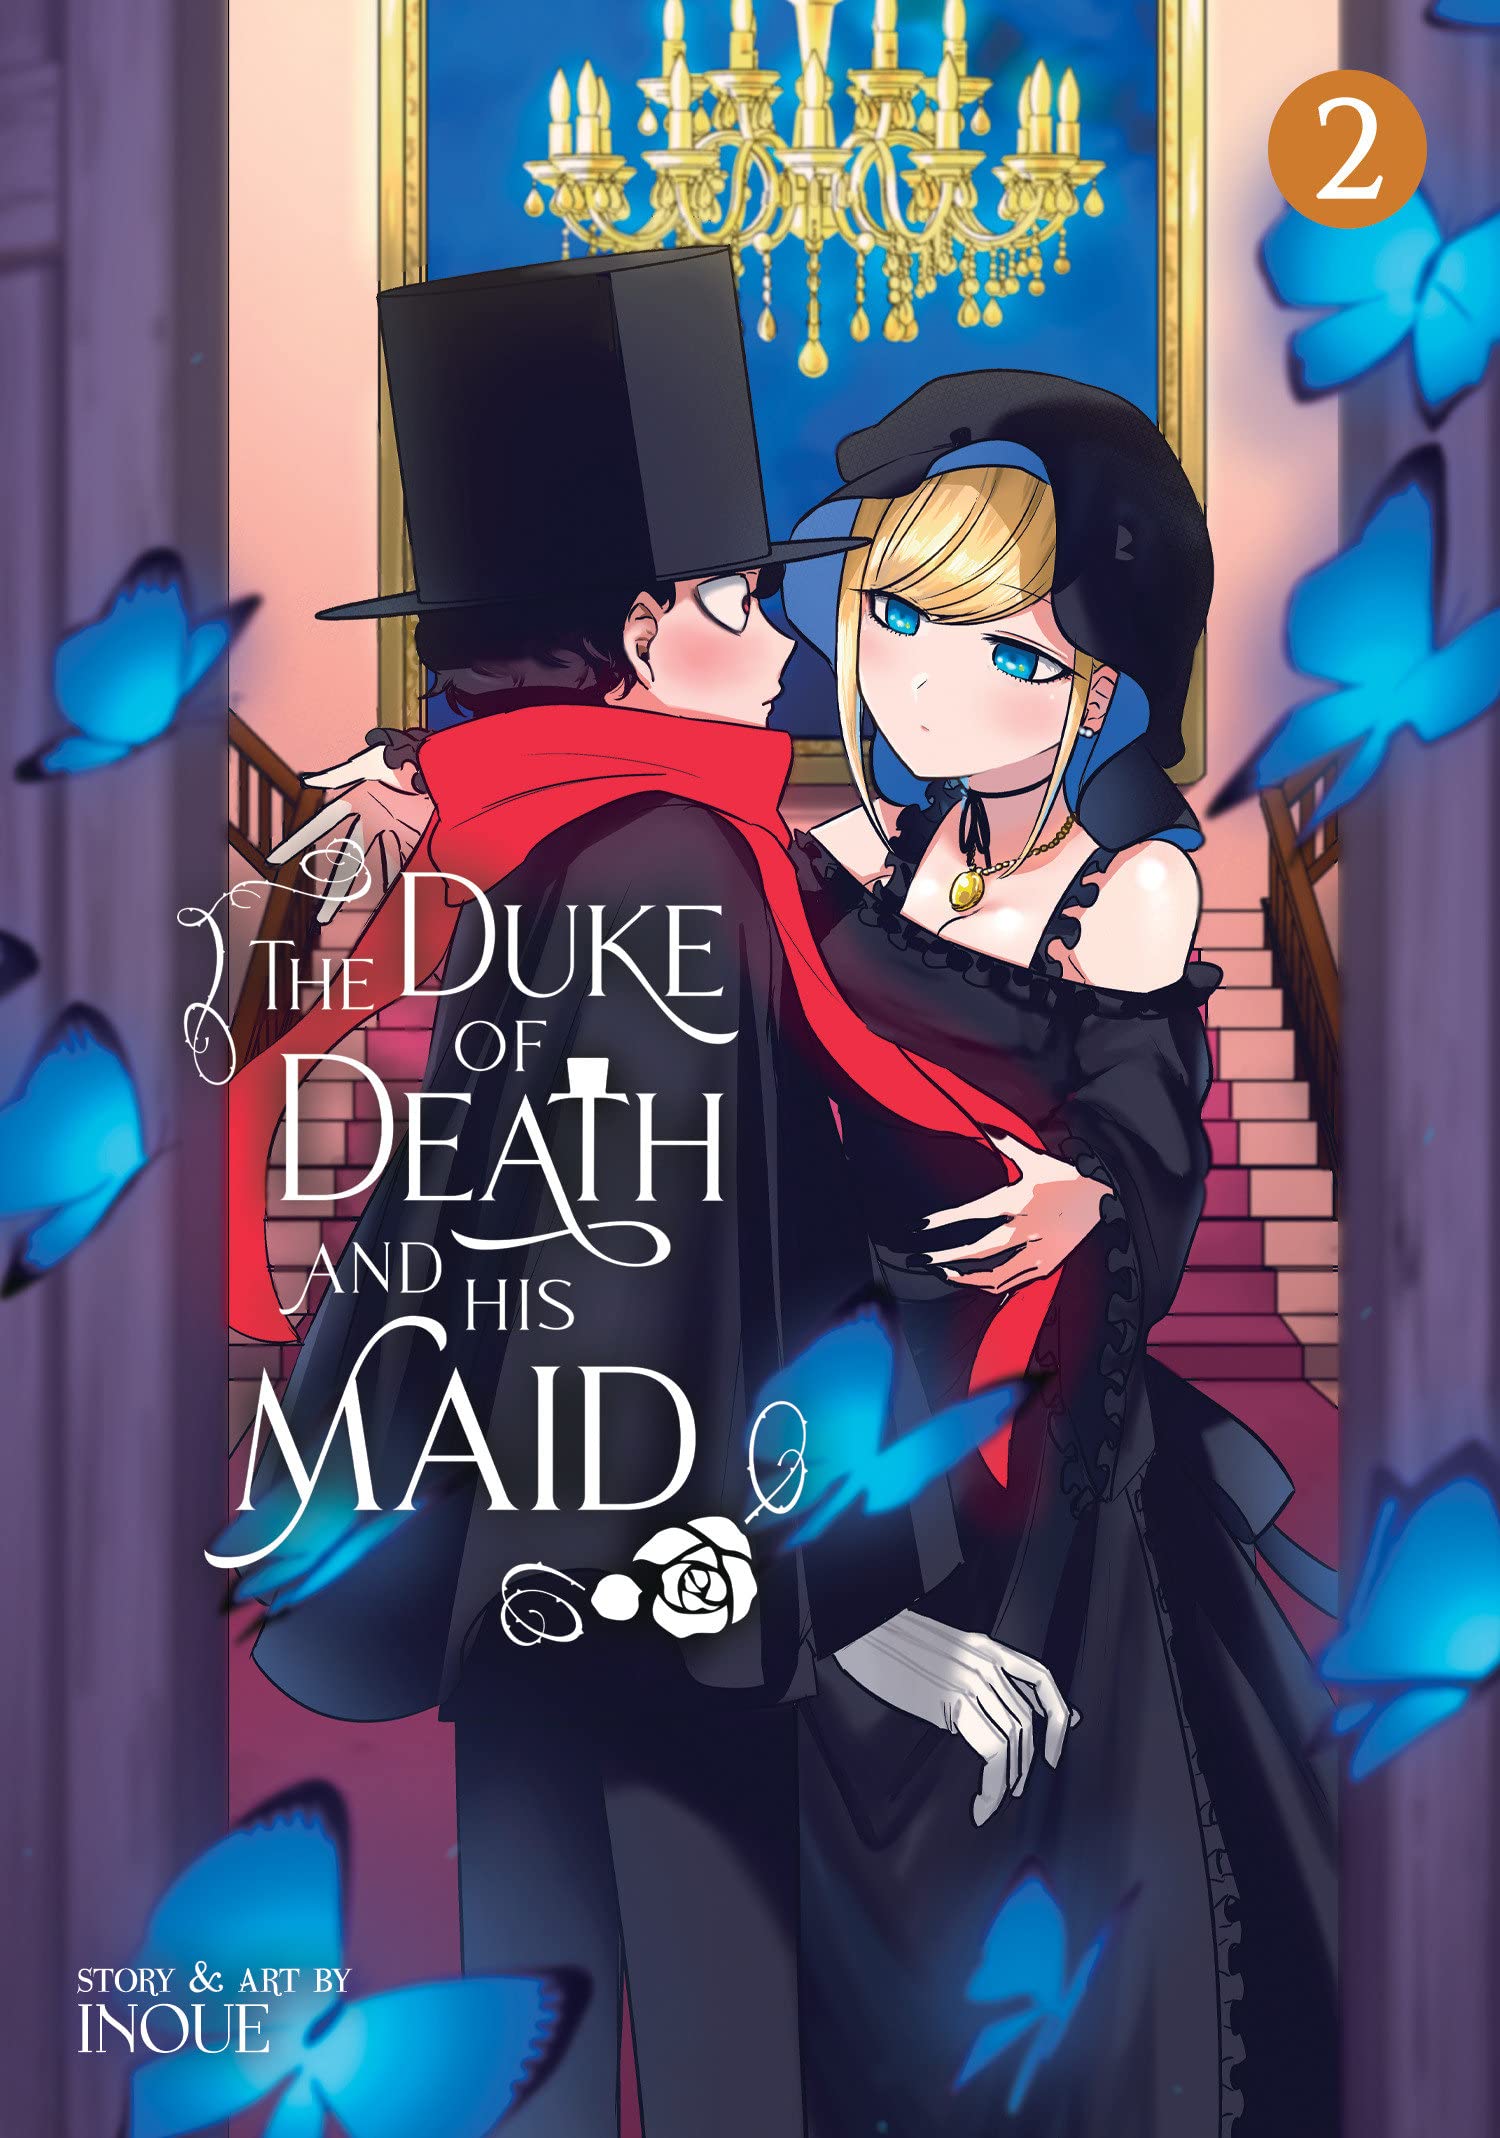 The Duke of Death and His Maid Vol. 02